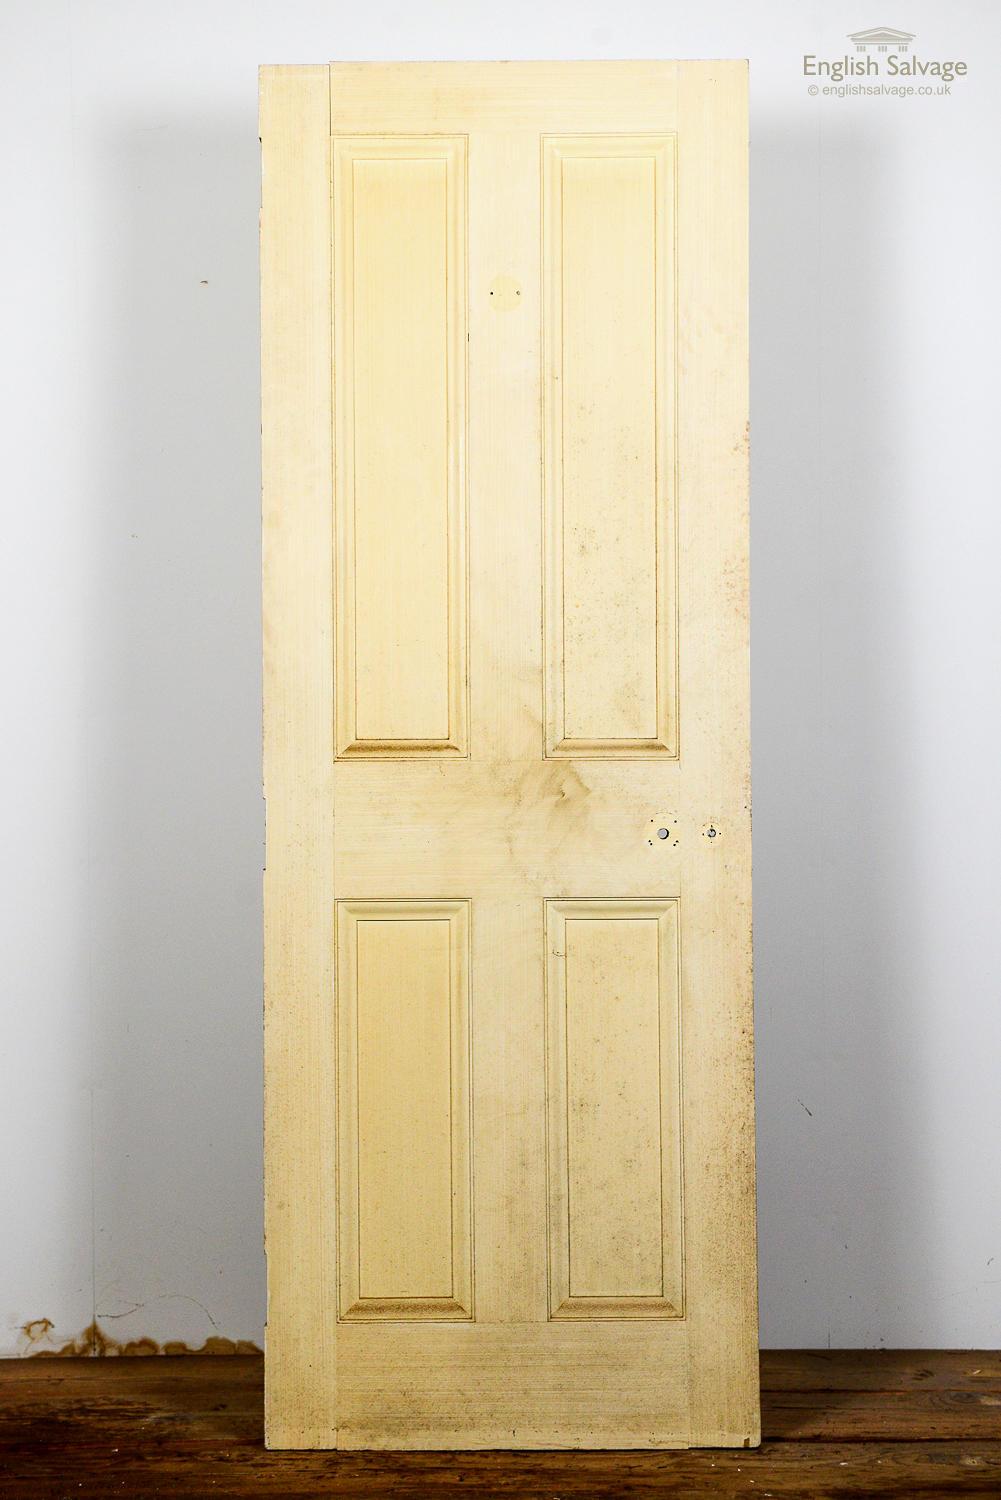 Salvaged painted pine four panelled interior door, which is part of a set of matching doors. Chips and scratches to the surface and paint commensurate with age and use.